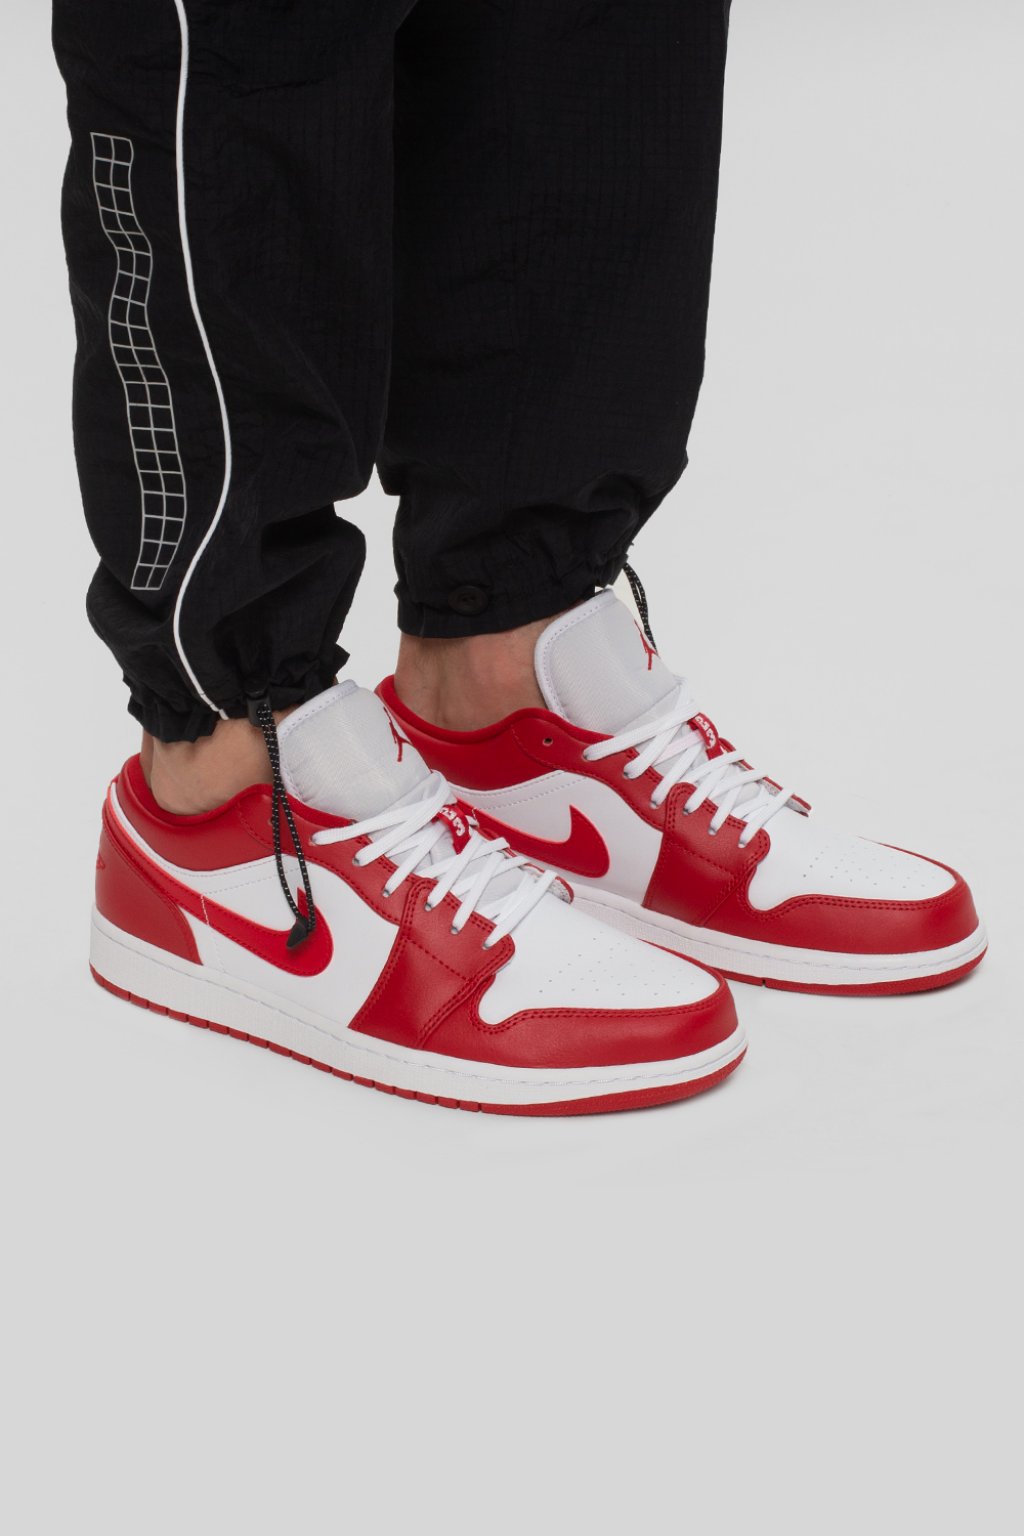 jordan 1 gym red outfit